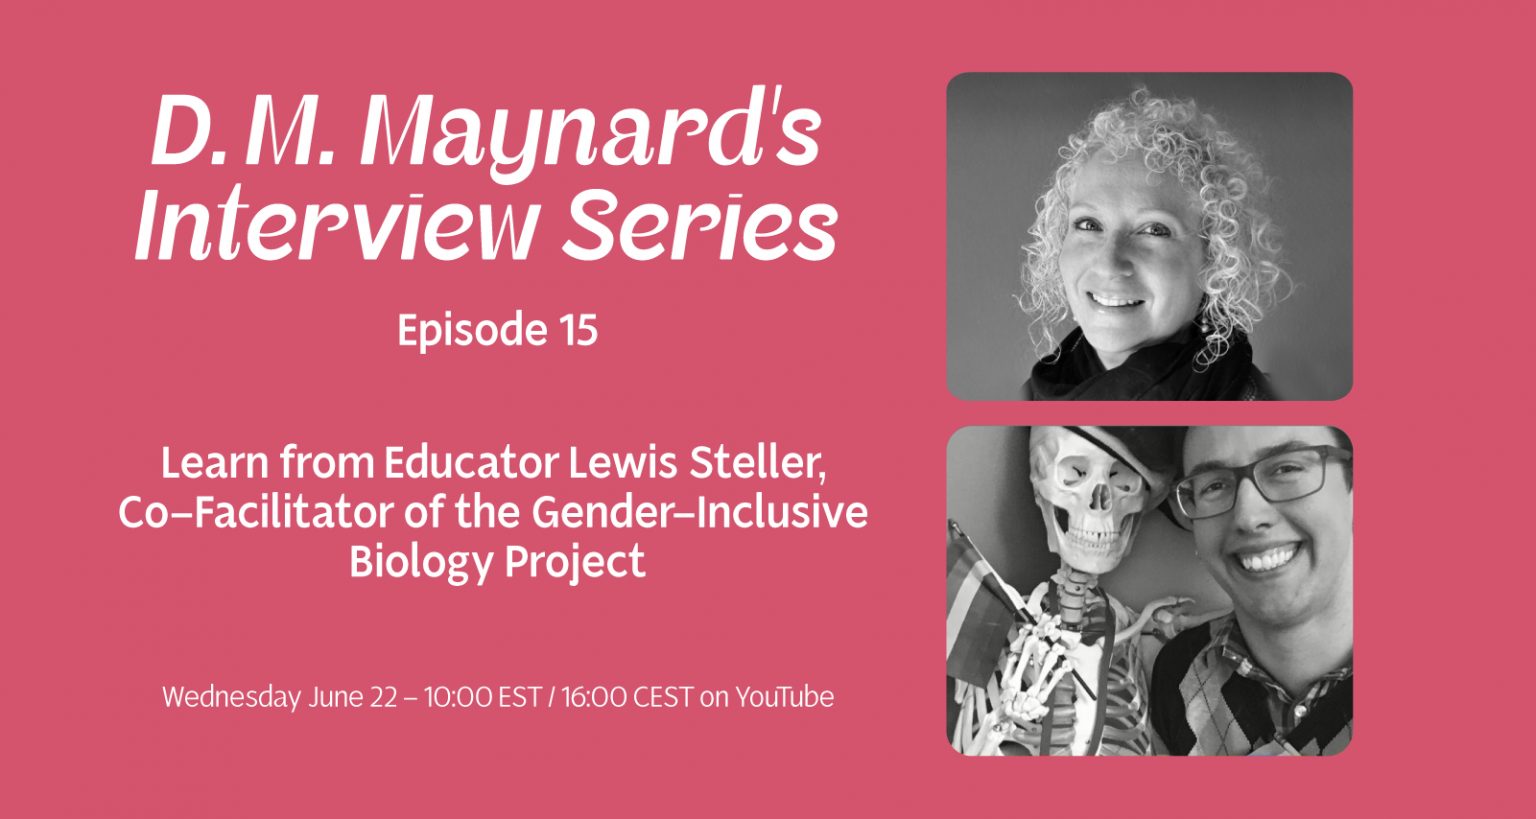 Announcing an upcoming livestream with Educator Lewis Steller, Co-Facilitator of the Gender-Inclusive Biology Project